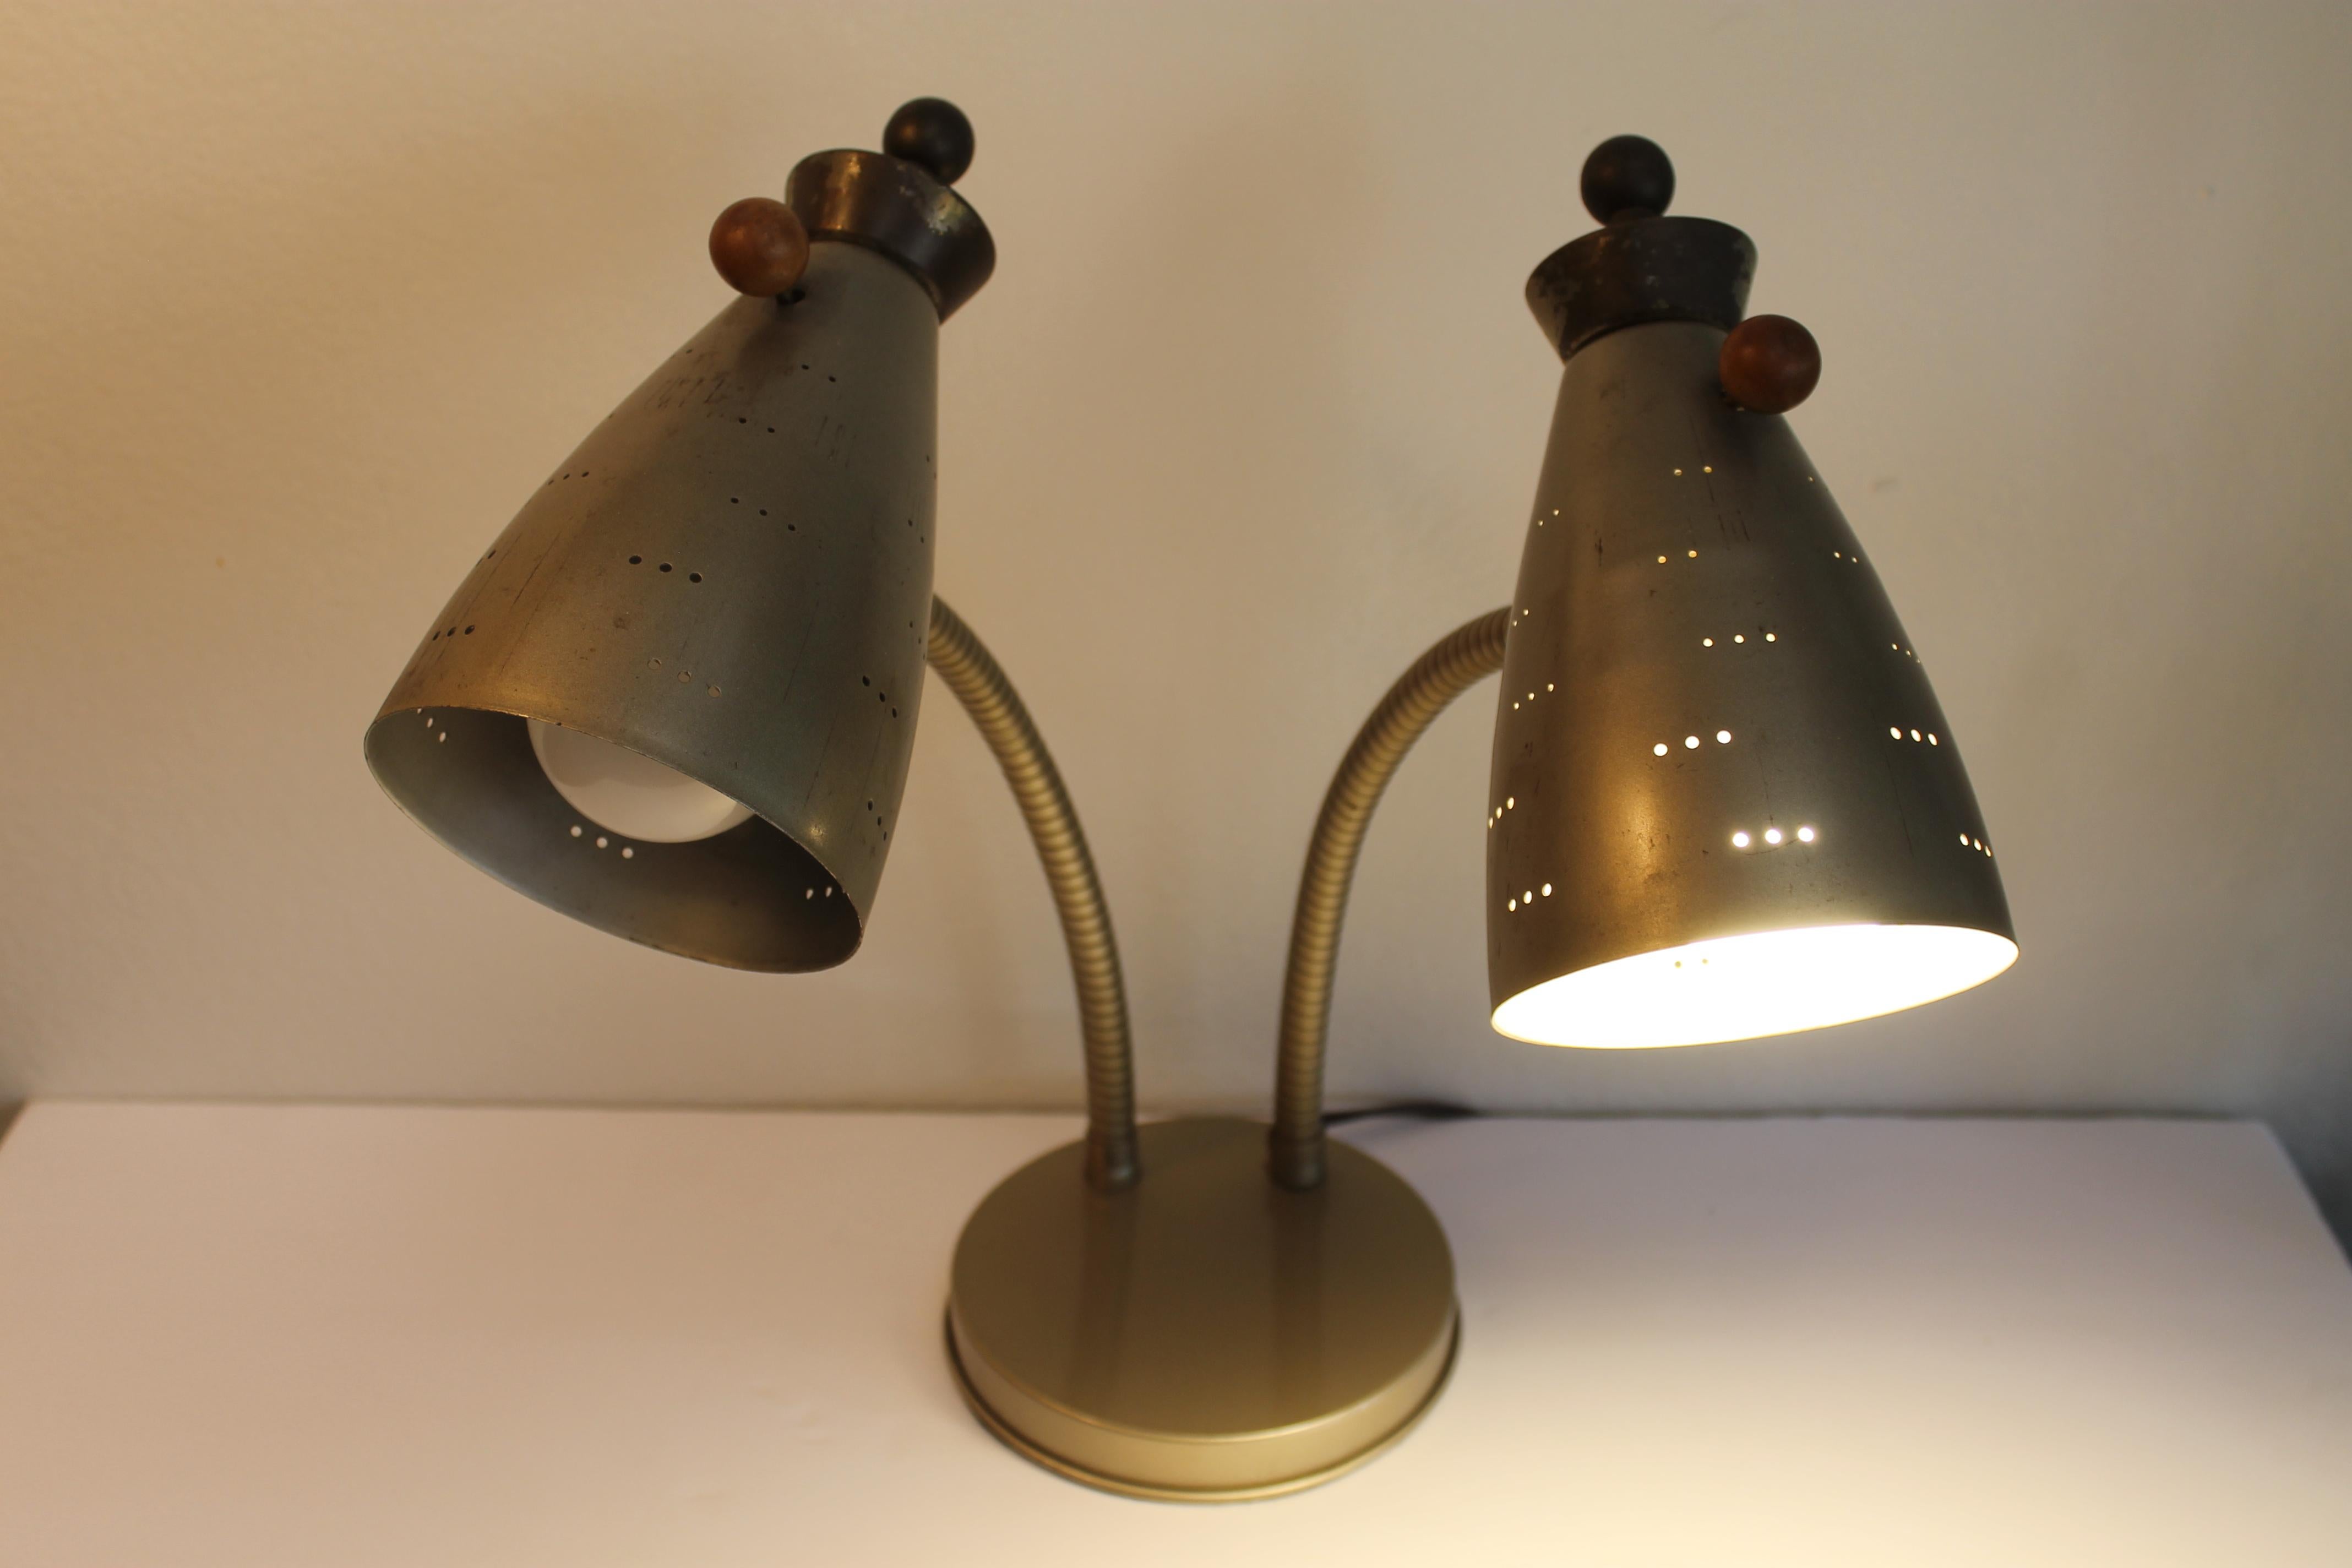 Goose neck table lamp with original patina. This fixture was originally a wall sconce. We replaced the inside weight with a heavier version and professionally rewired it for a table lamp with 3-way light bulbs. Lamp measures (as photographed) 14